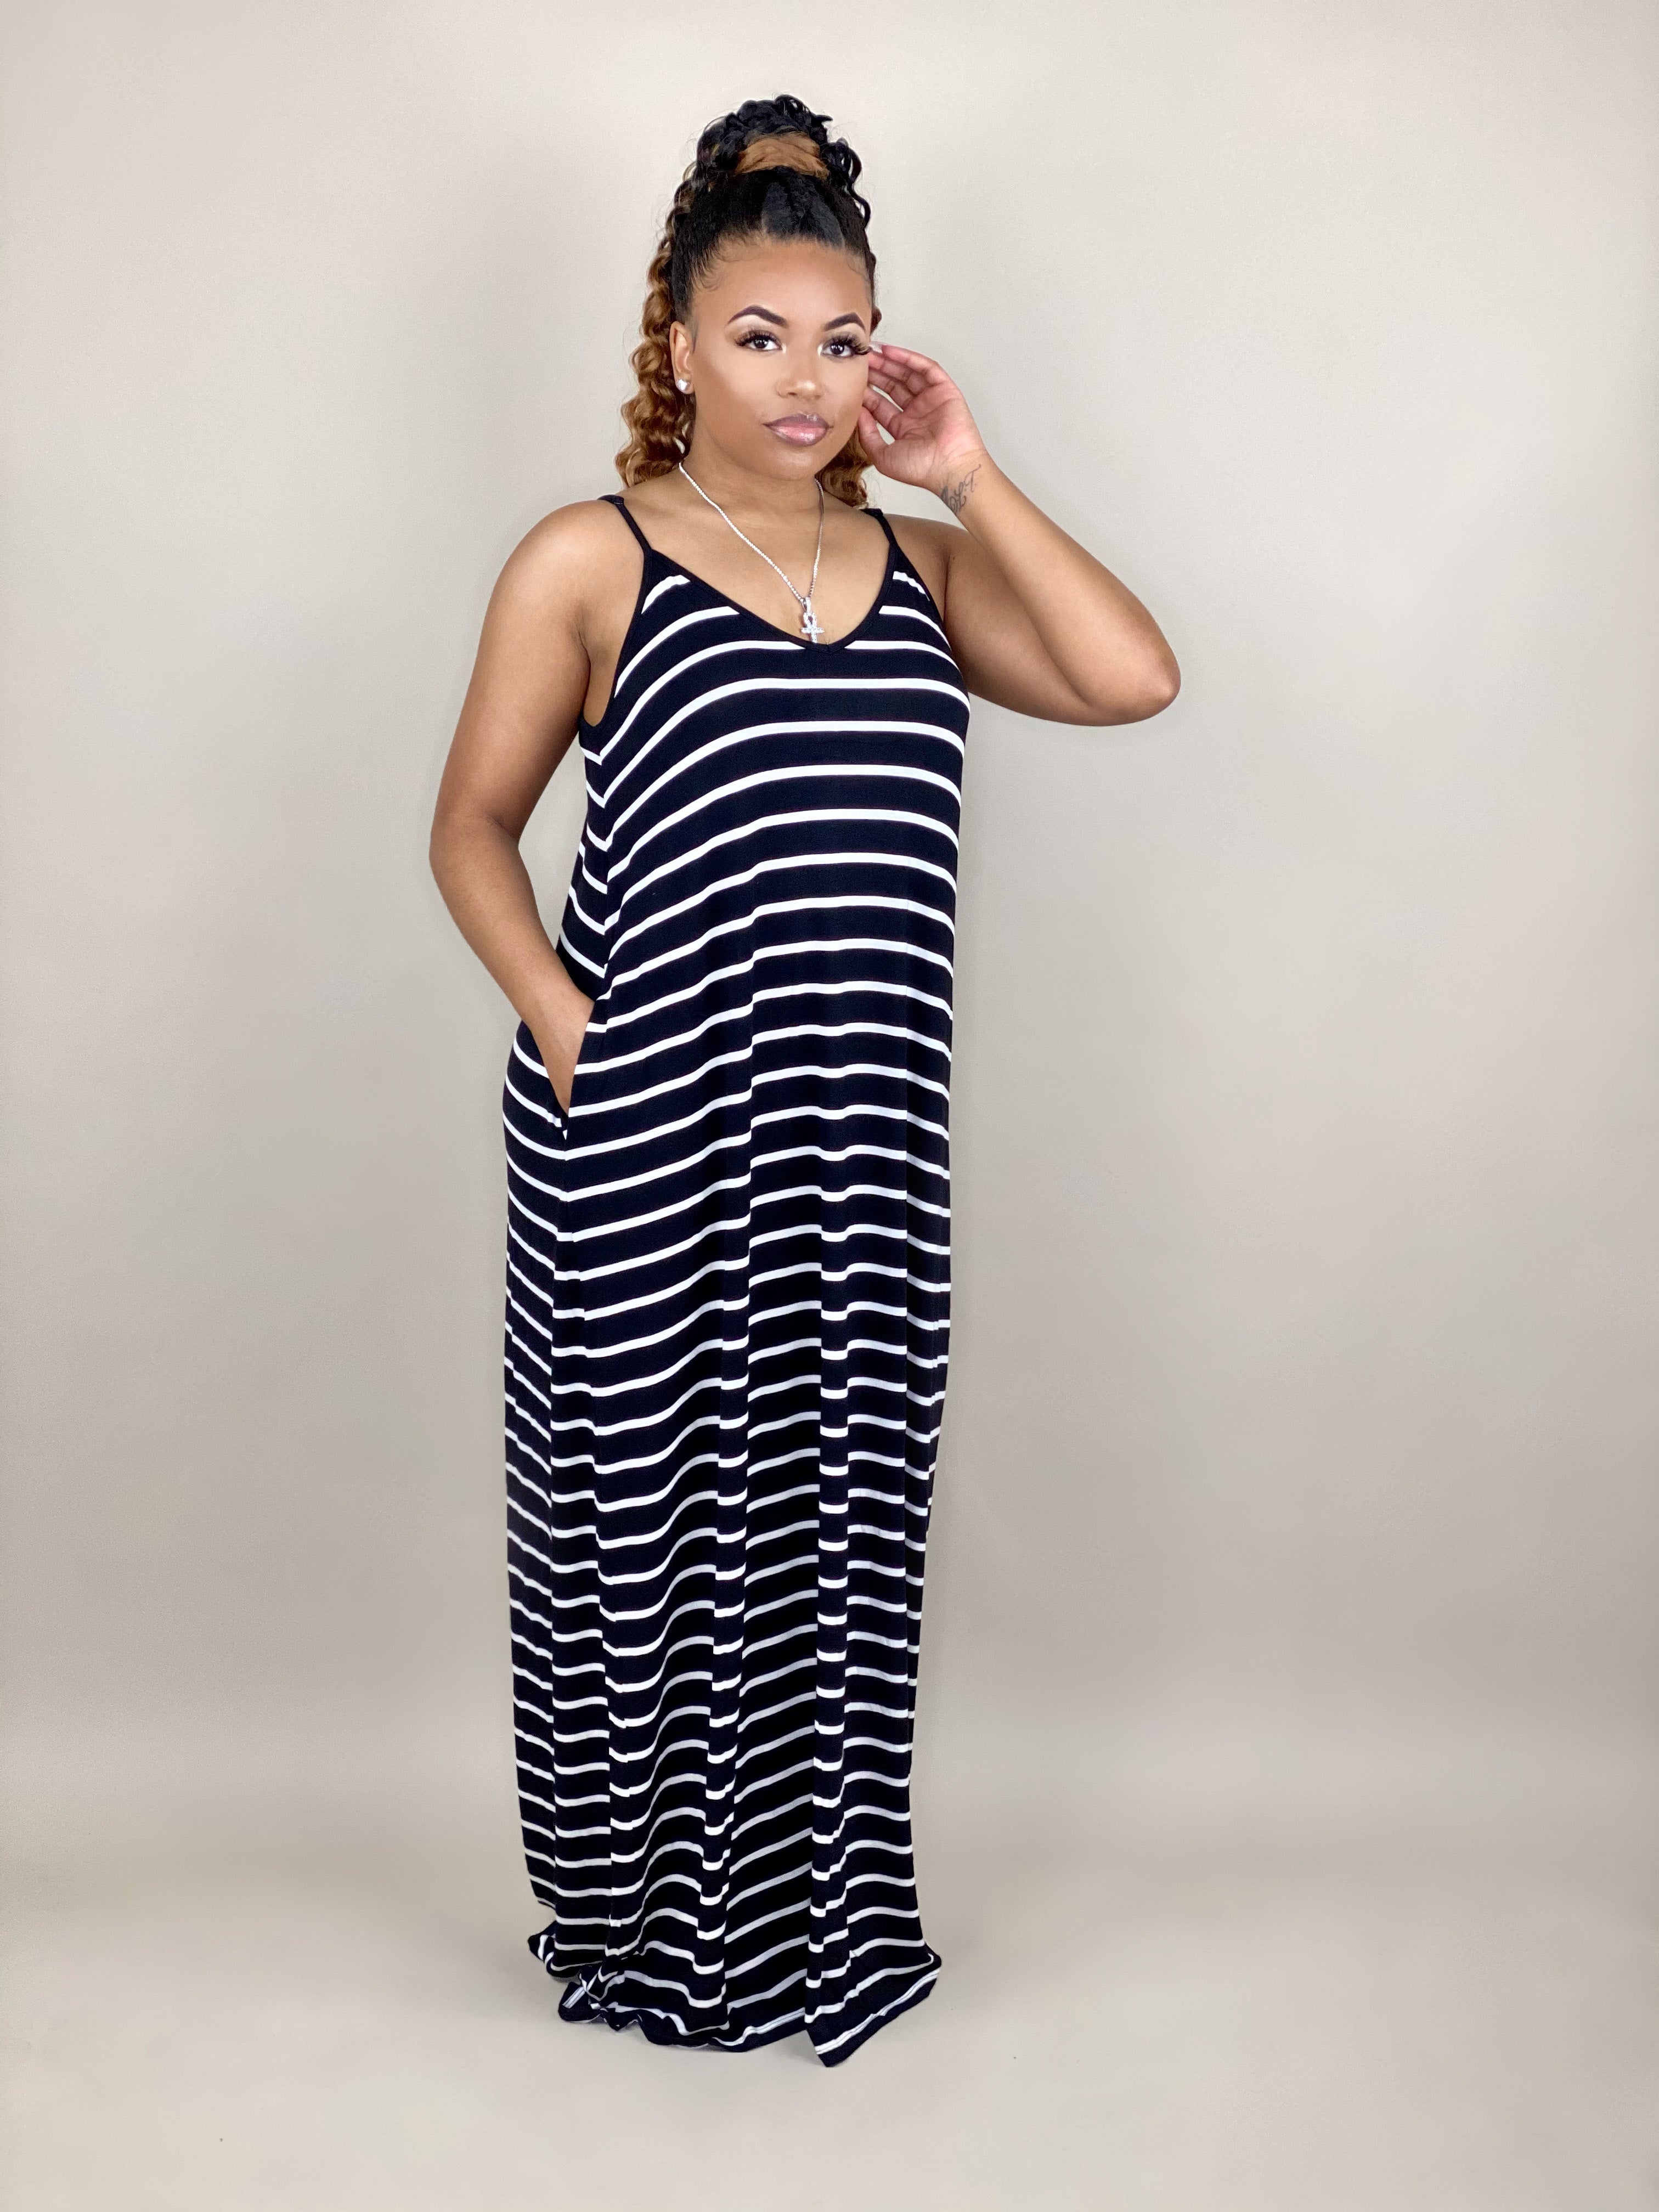 Staycation Maxi Dress (Striped) - KASH Queen